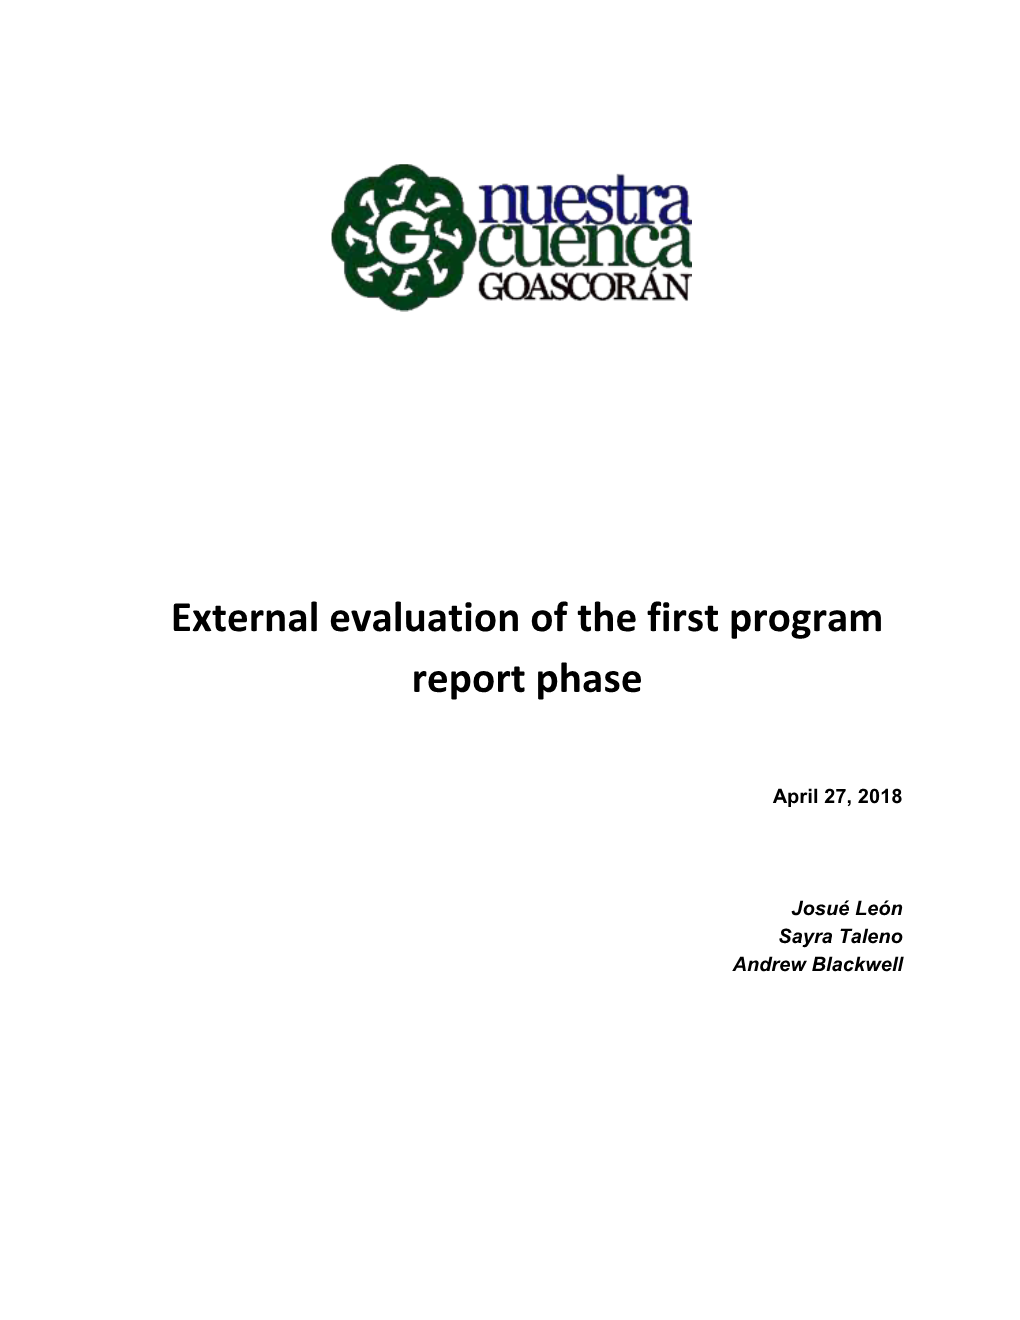 External Evaluation of the First Program Report Phase